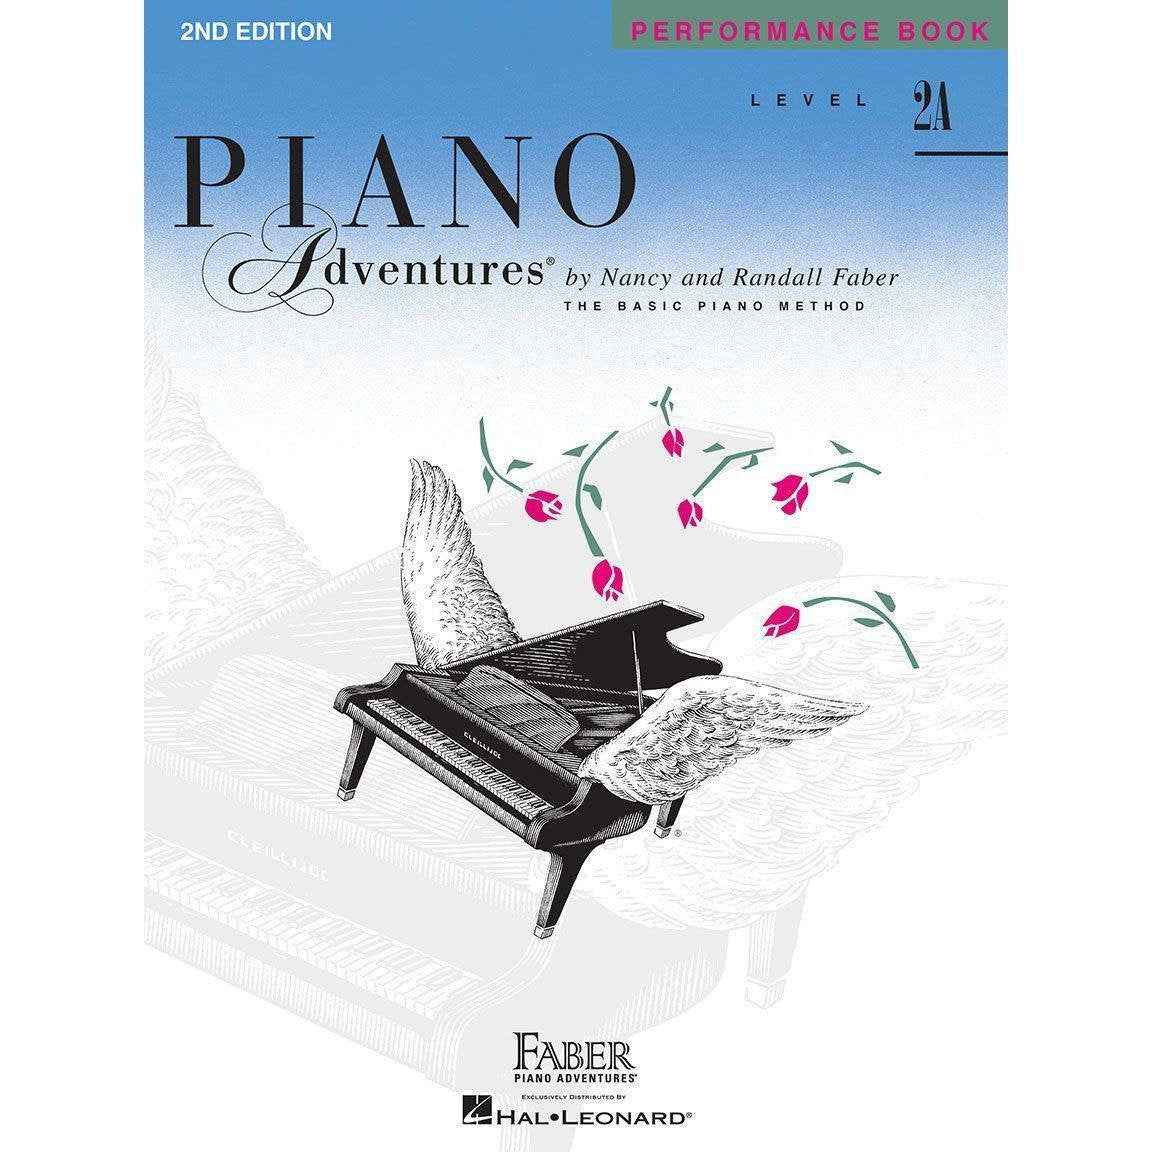 Faber Piano Adventures-2A-Performance-Andy's Music